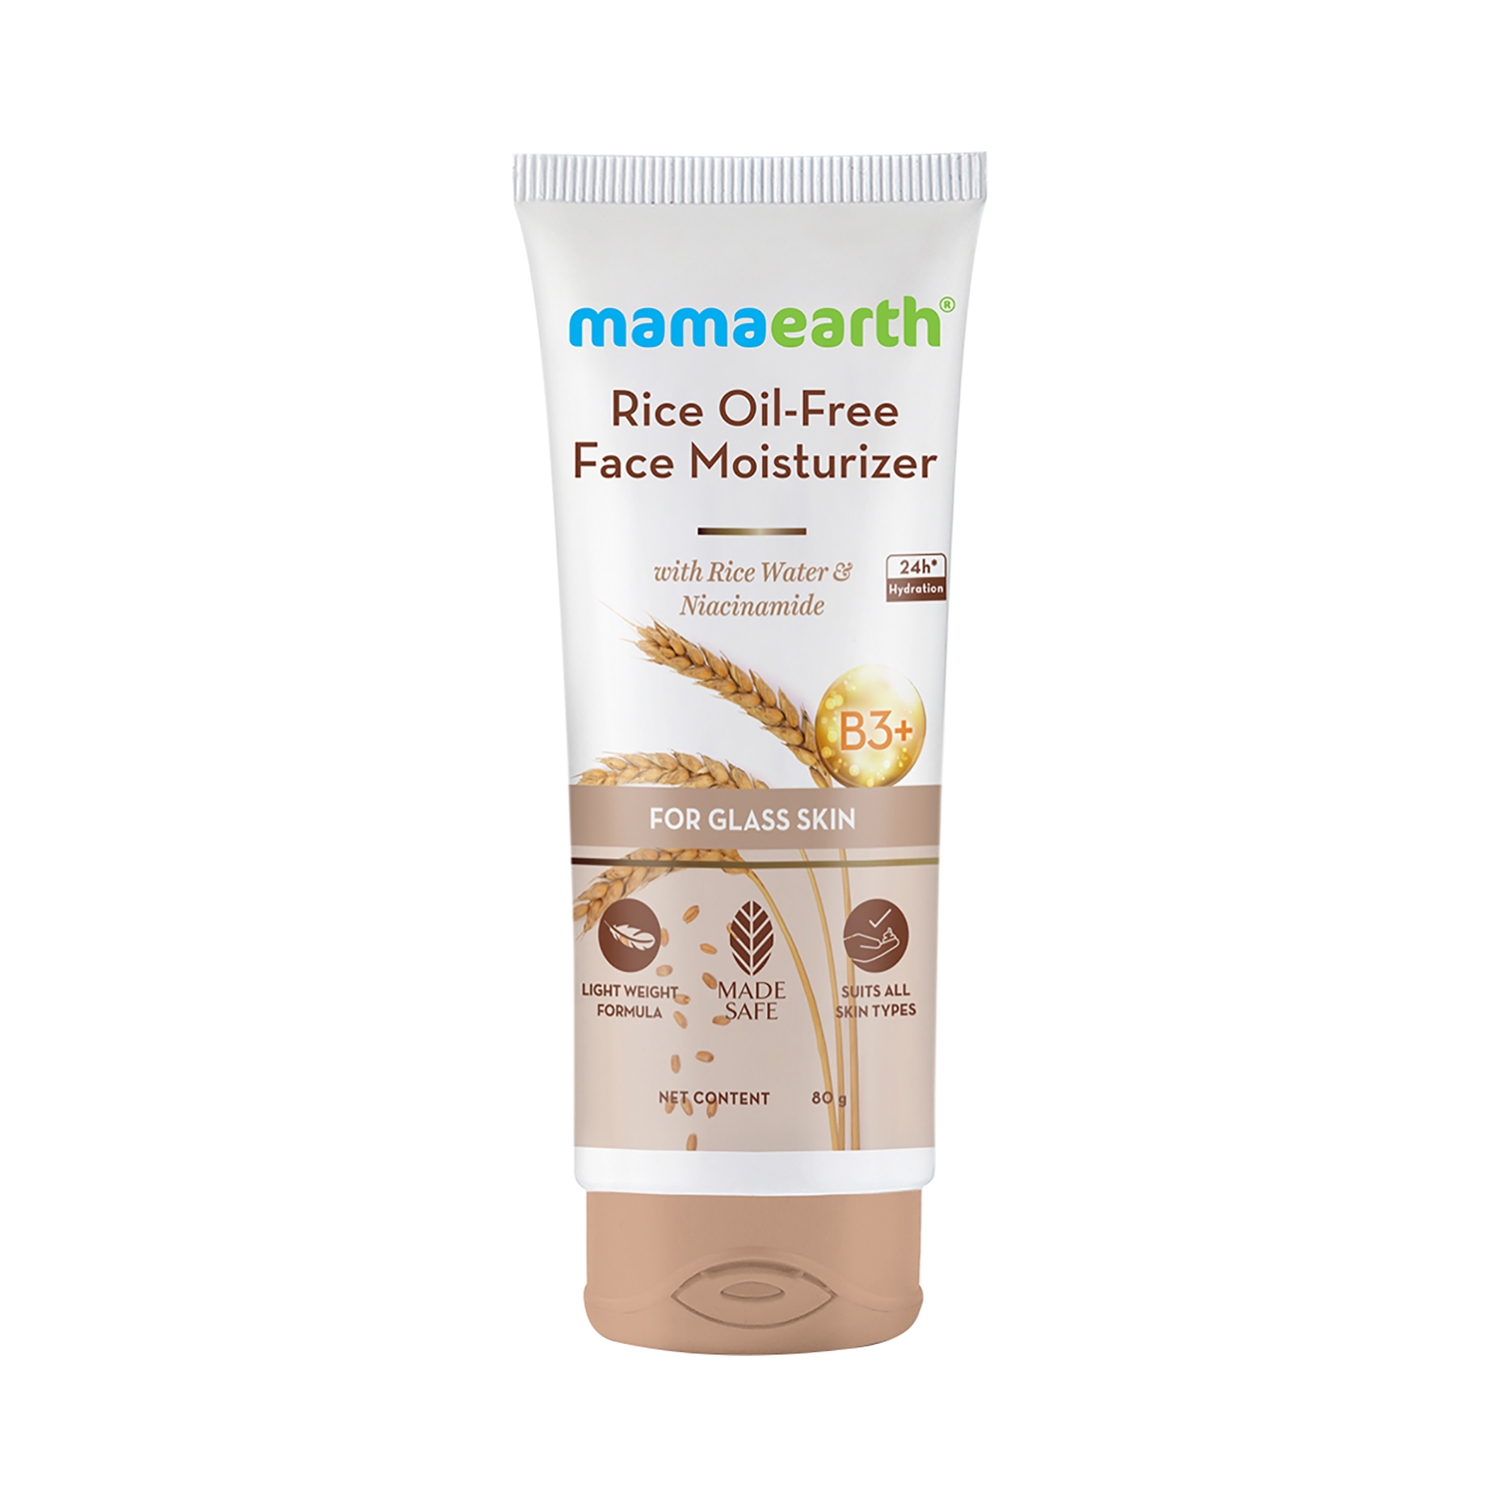 Mamaearth Rice Oil-Free Face Moisturizer With Rice Water & Niacinamide For Glass Skin (80g)